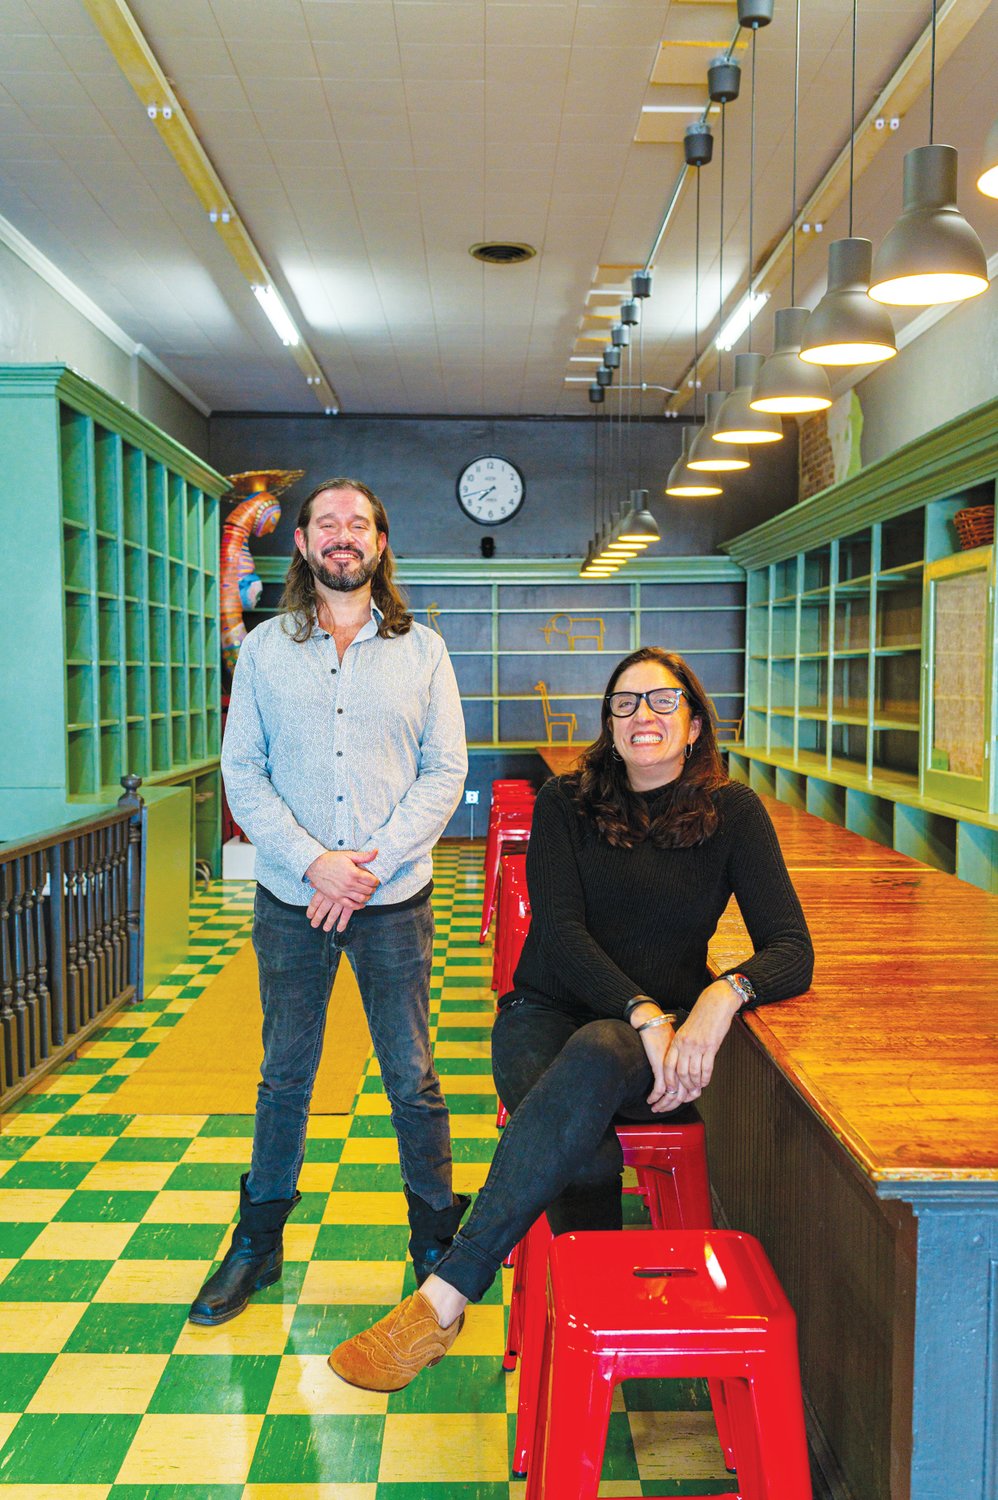 Michael Feezor of the N.C. Arts Incubator and Lisa Fedele, owner of The Alliance, sit in the program-center half of the building where students can access high-speed internet and confer with teachers in-person.